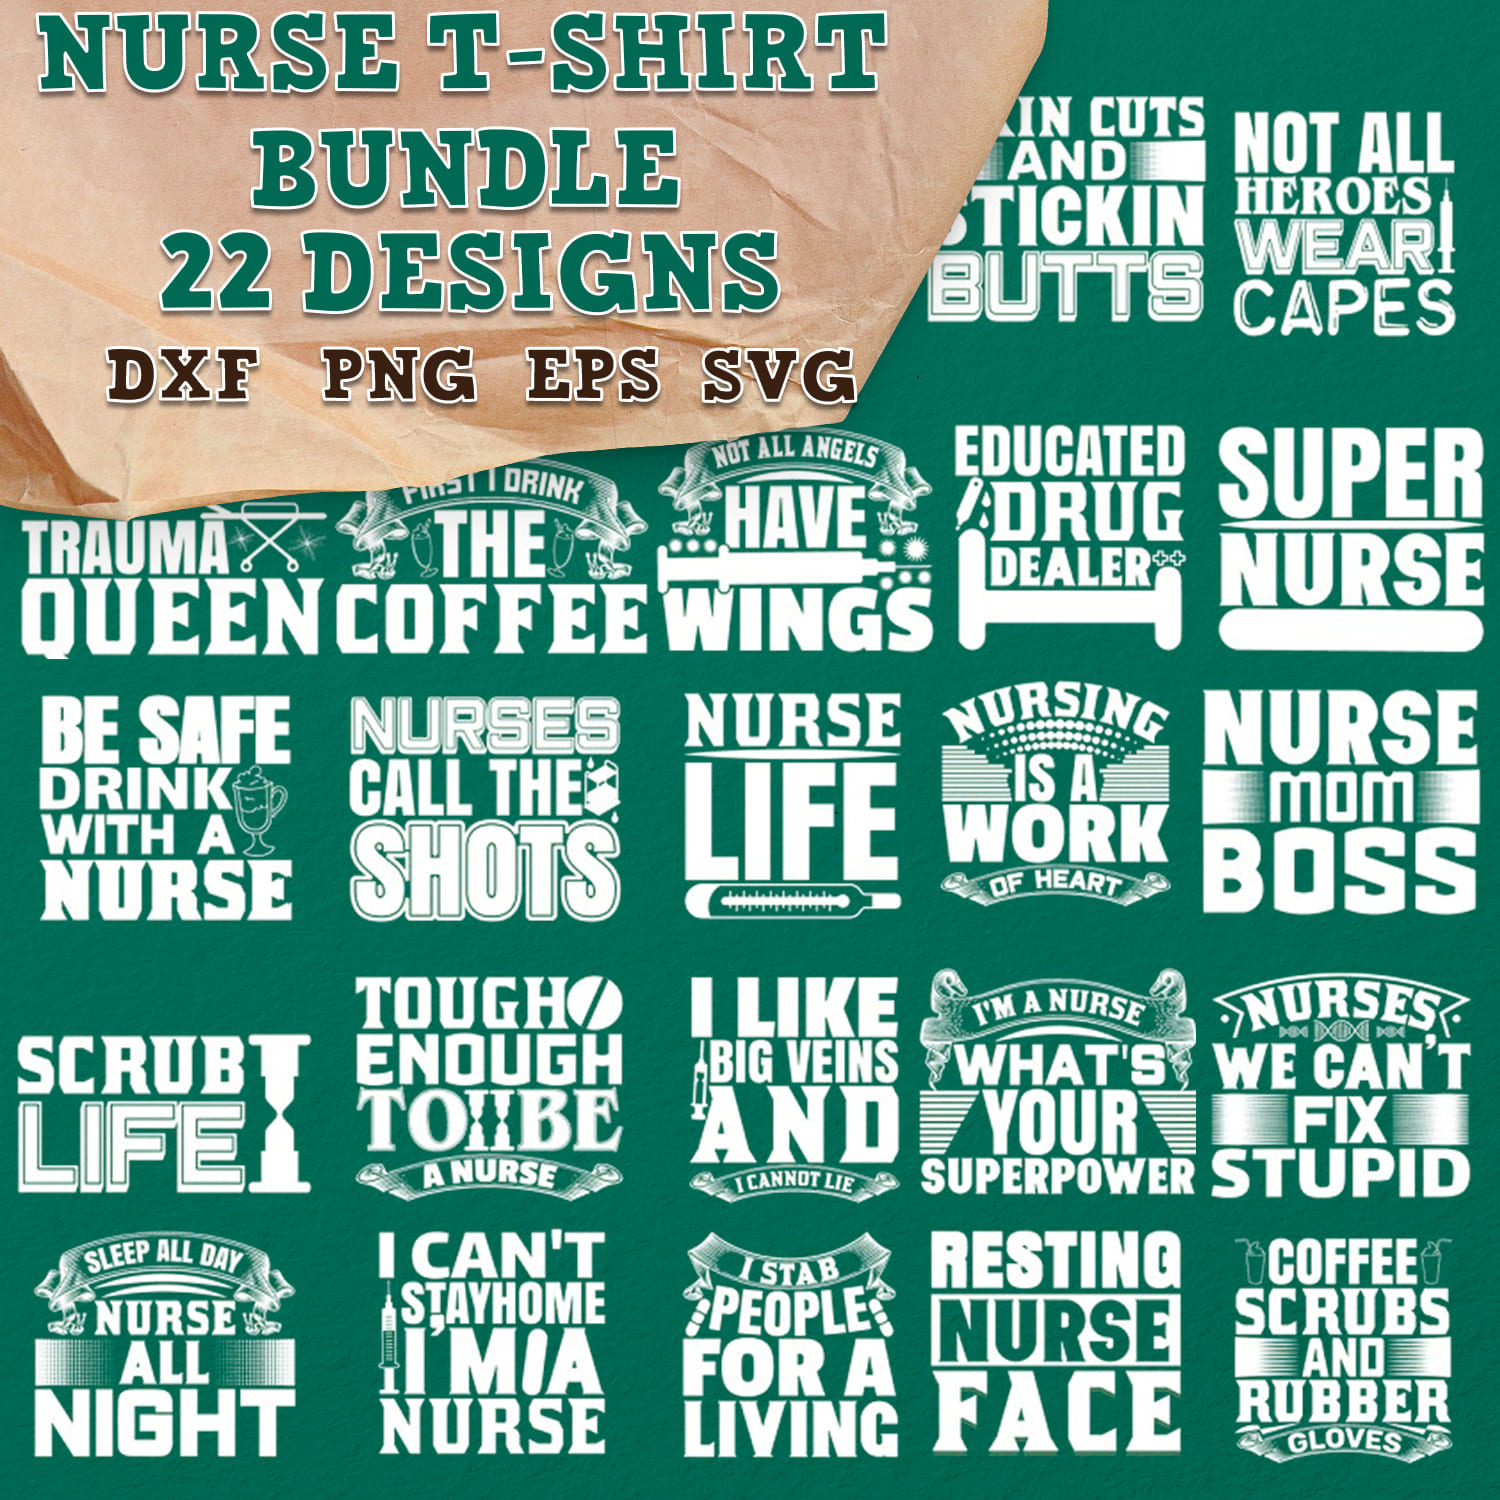 A collection of charming white images on a green background about a nurse.